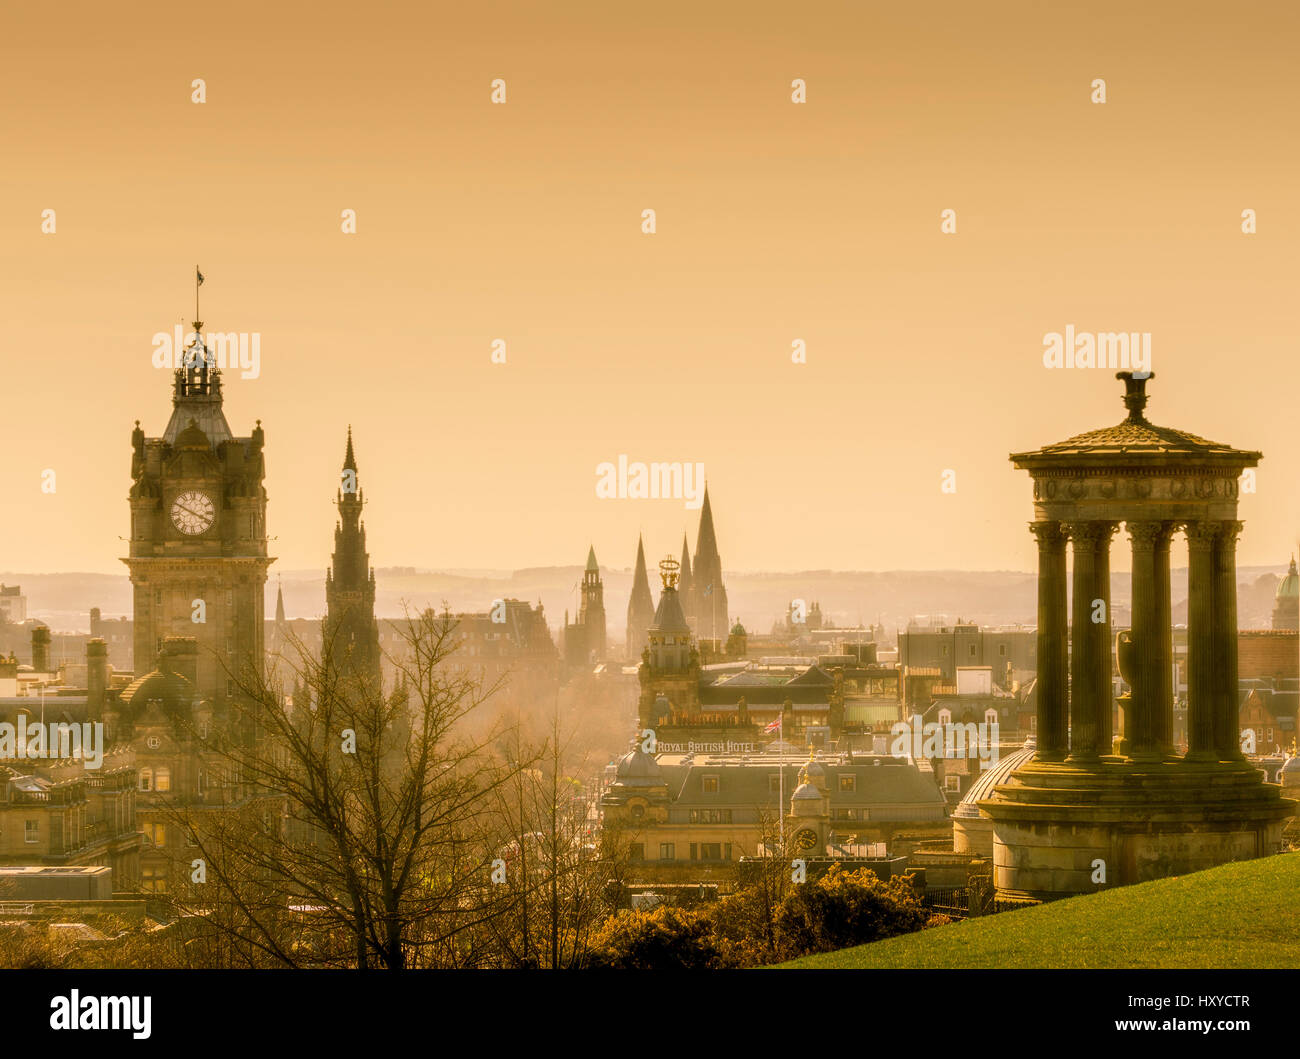 The Dugald Stewart Monument and Balmoral Hotel Clocktower with an atmospheric golden sky. Stock Photo